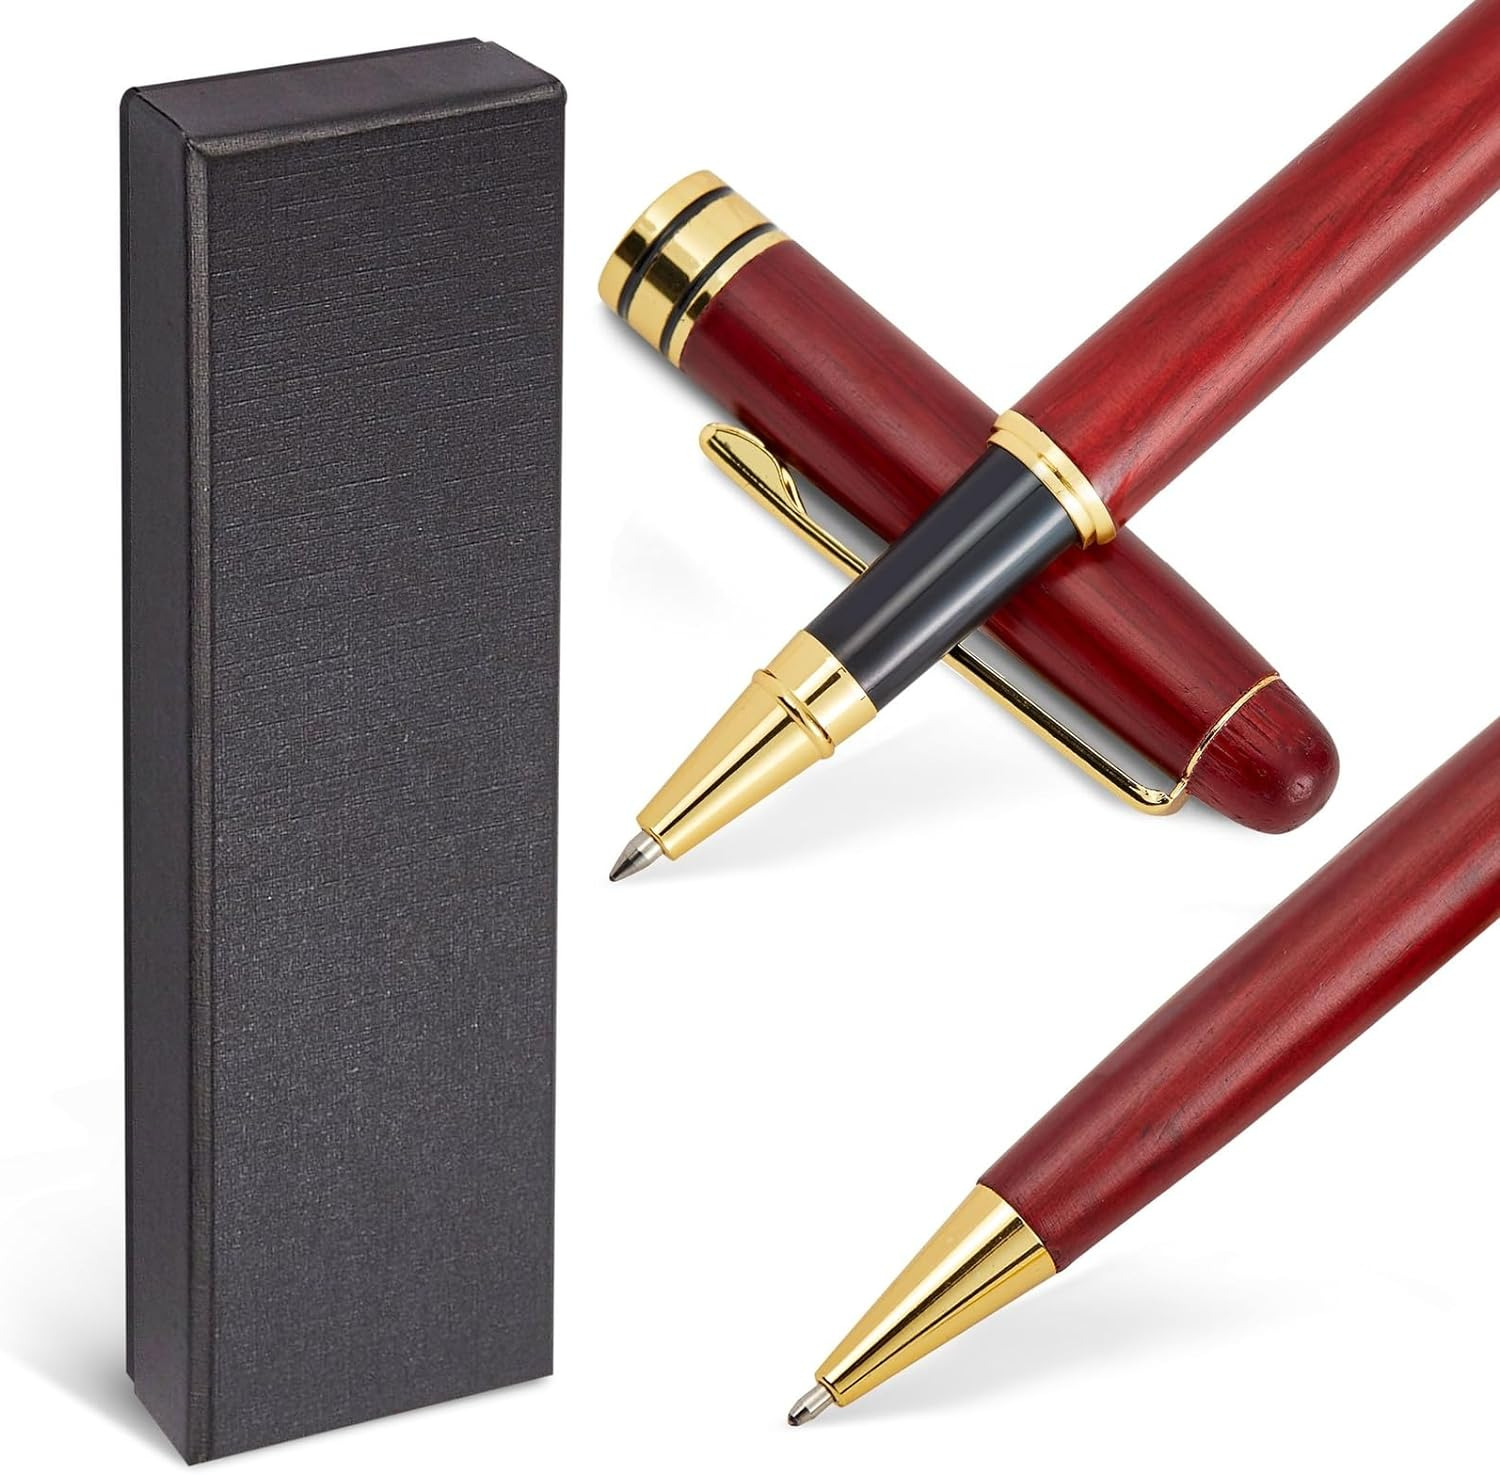 2 Pack Luxury Rosewood Pen Sets for Men Gift - Fancy Nice Ballpoint Pens with Bl